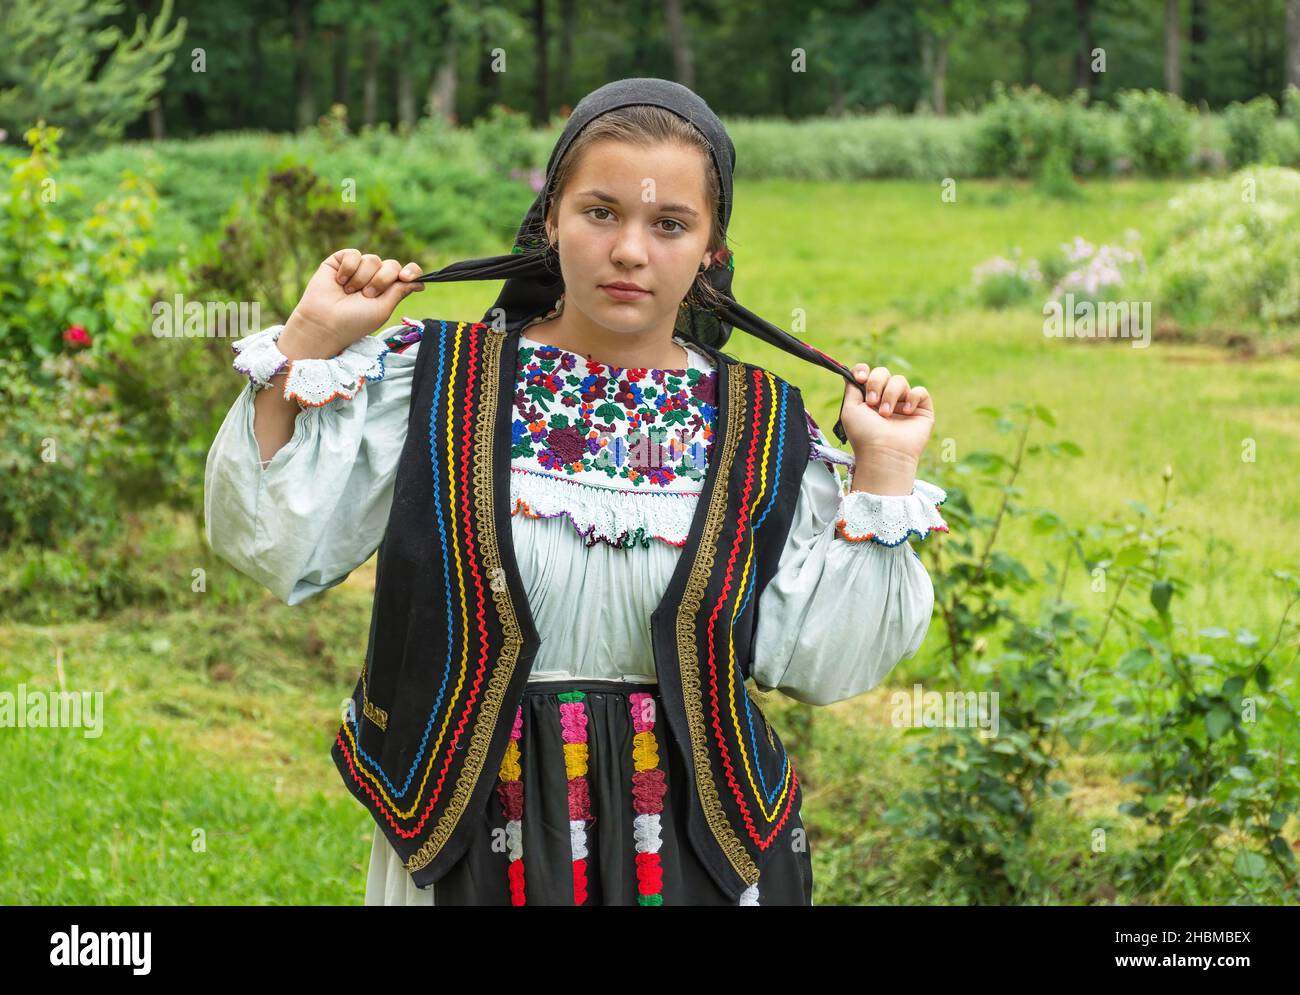 Salaj, Romania-May 15, 2018: outdoor portrait of a young girl wearing  traditional Romanian costume Stock Photo - Alamy